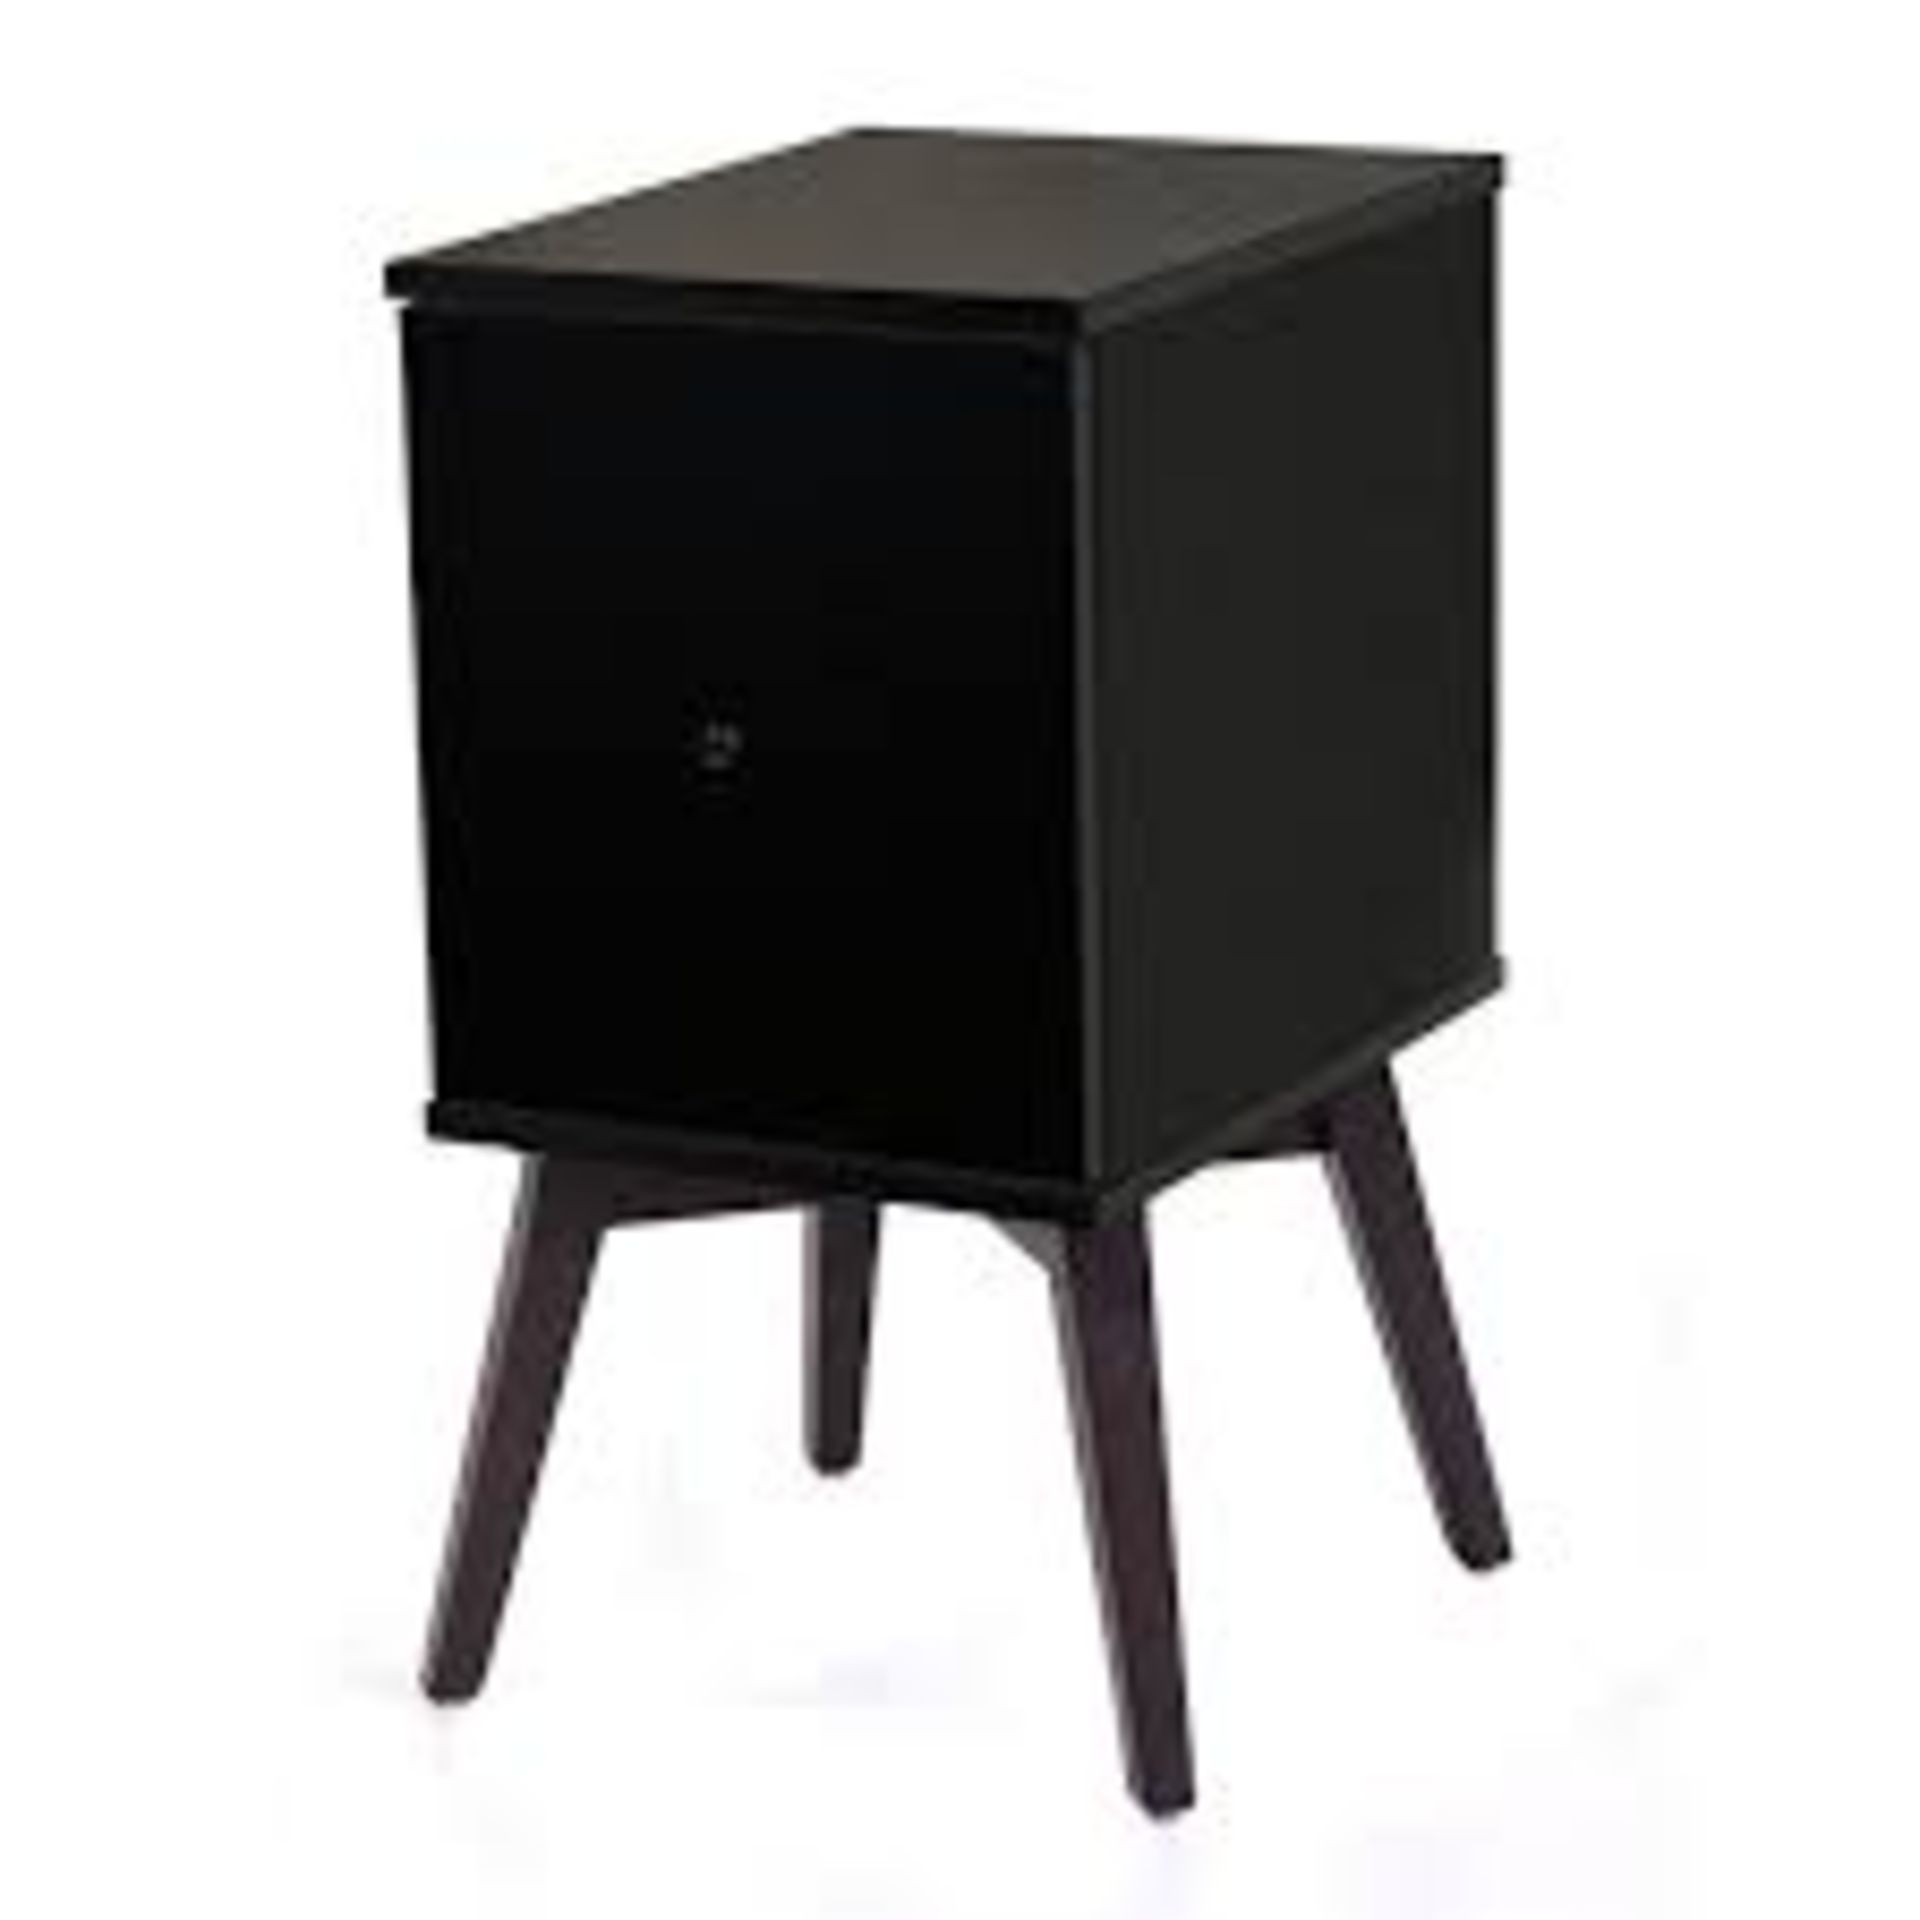 Hem Designer Black Bedside Table RRP £90 (Images Are For Illustrations Purposes Only And May Not